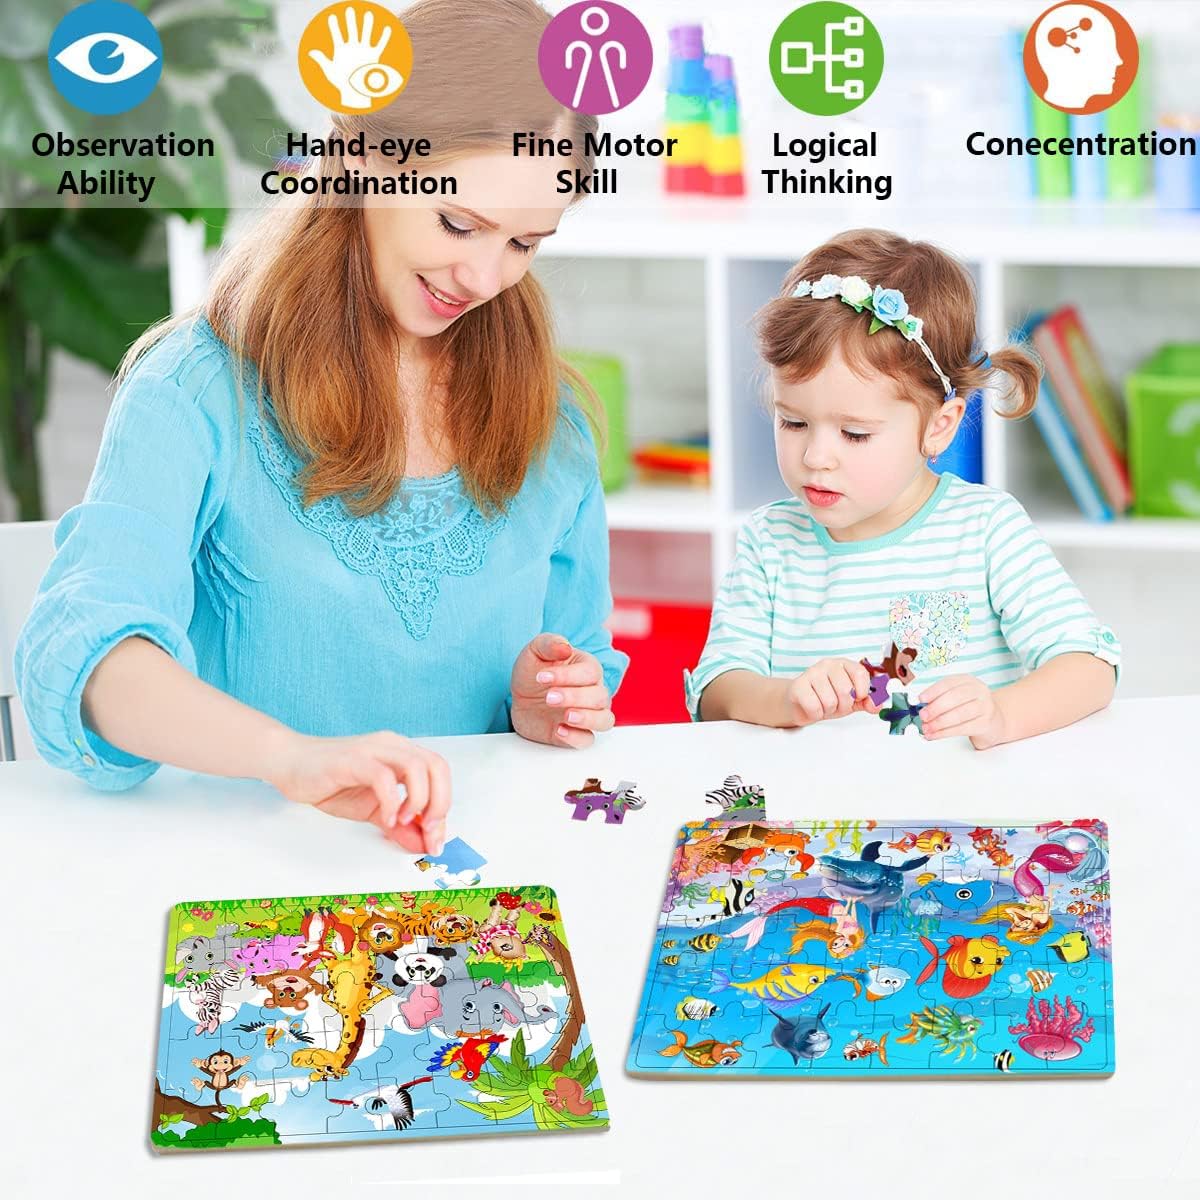 Puzzles for Kids Ages 4-8,40 Piece Colorful Wooden Puzzles for Toddler Children Learning Educational Puzzle Set Toys for Boys and Girls (4 Puzzles)